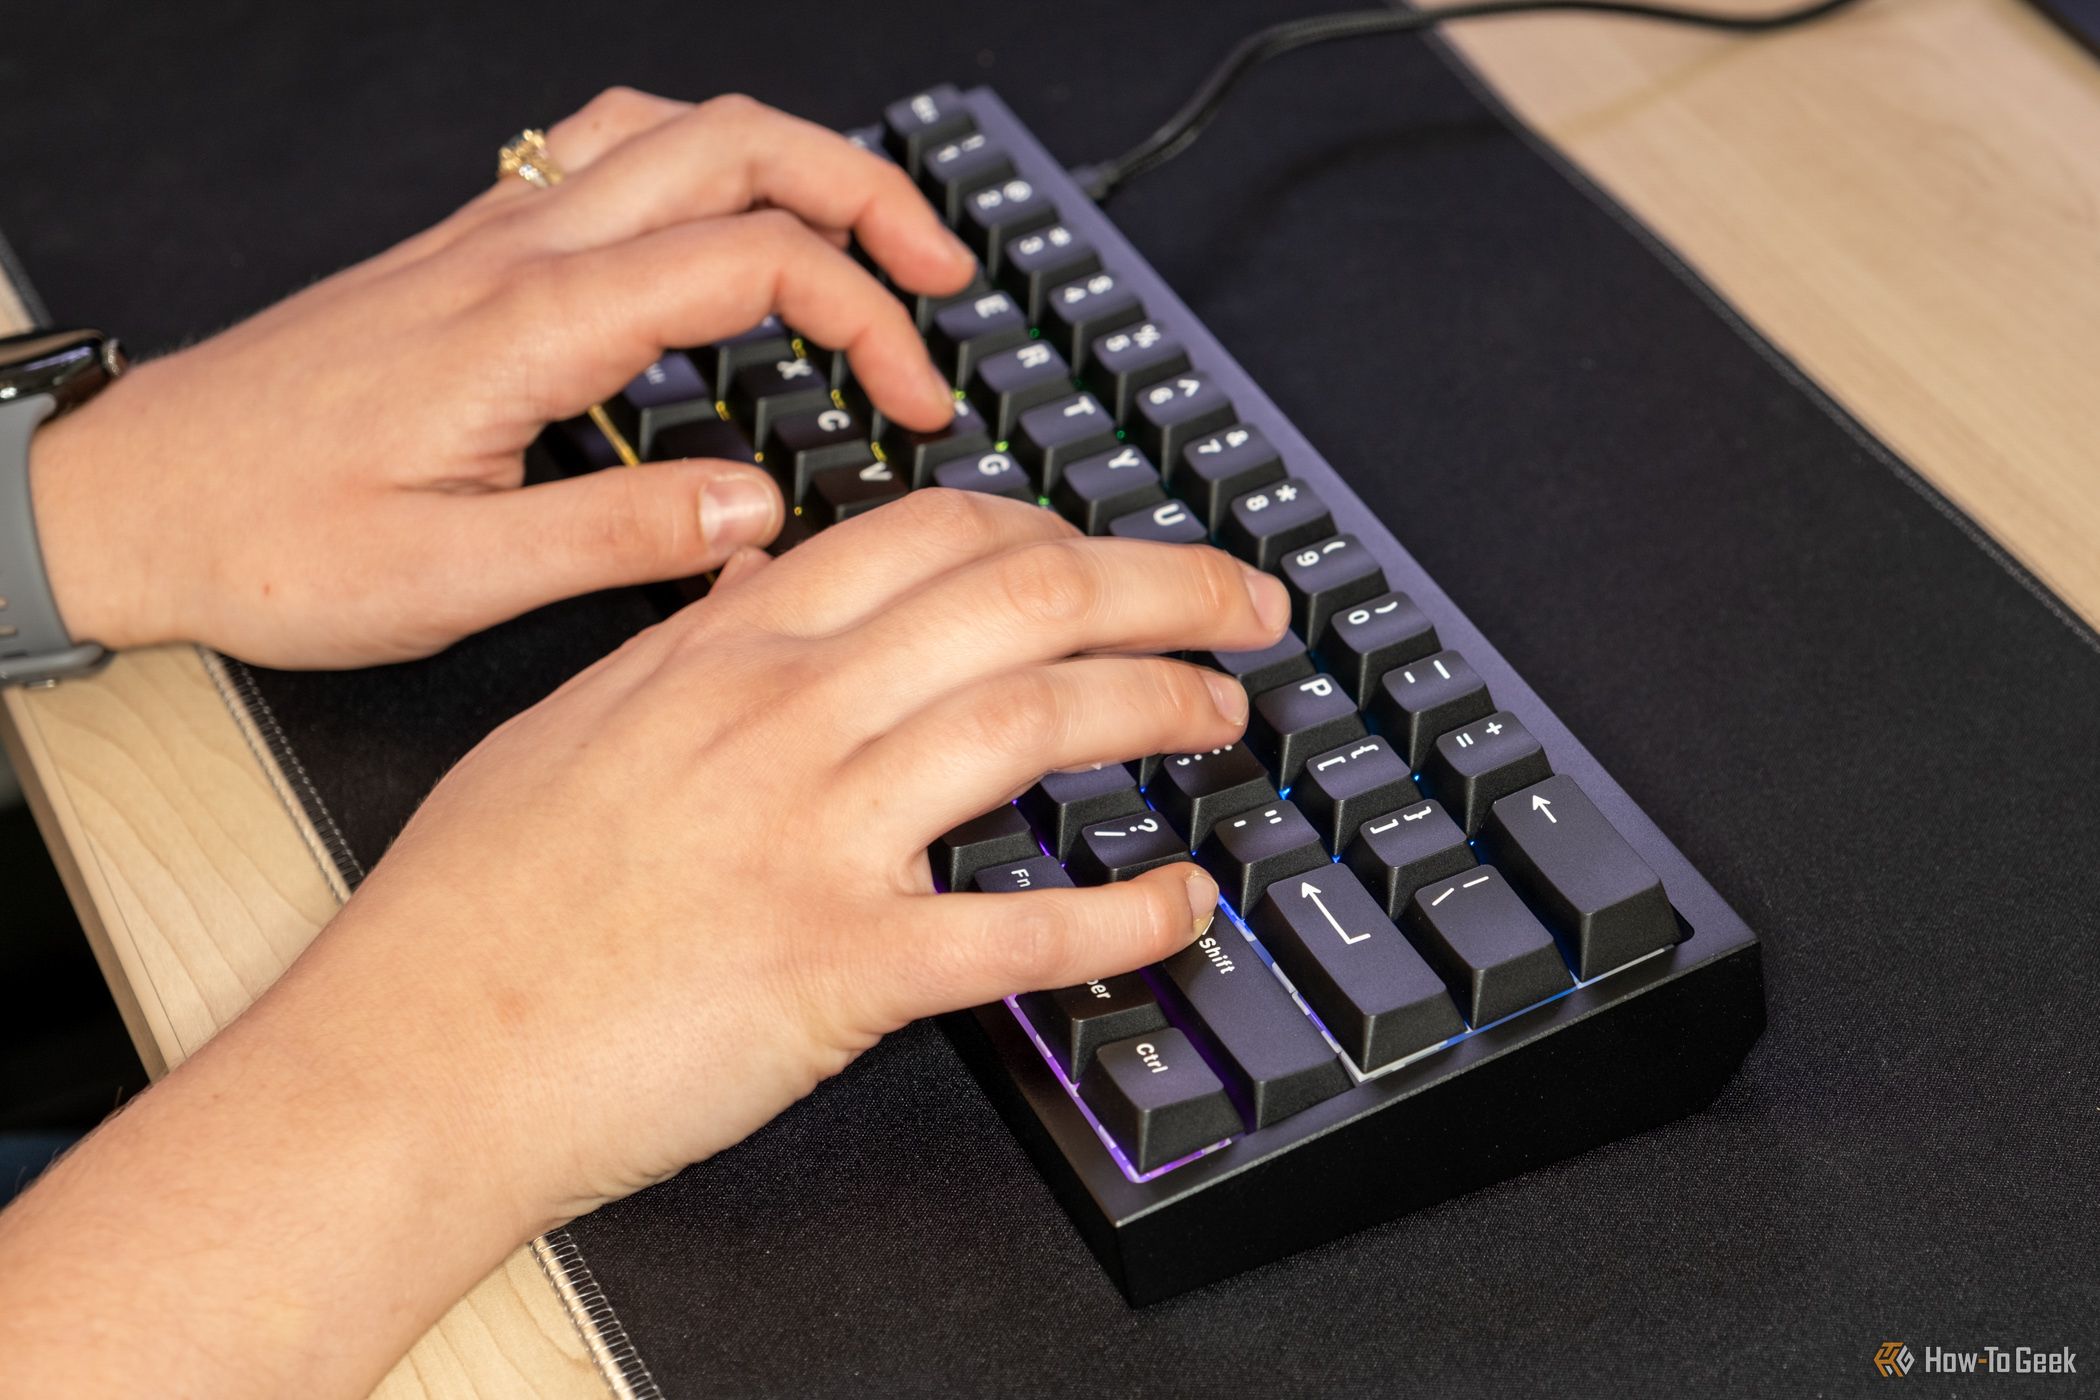 Person using the CyberPowerPC CK60 gaming keyboard